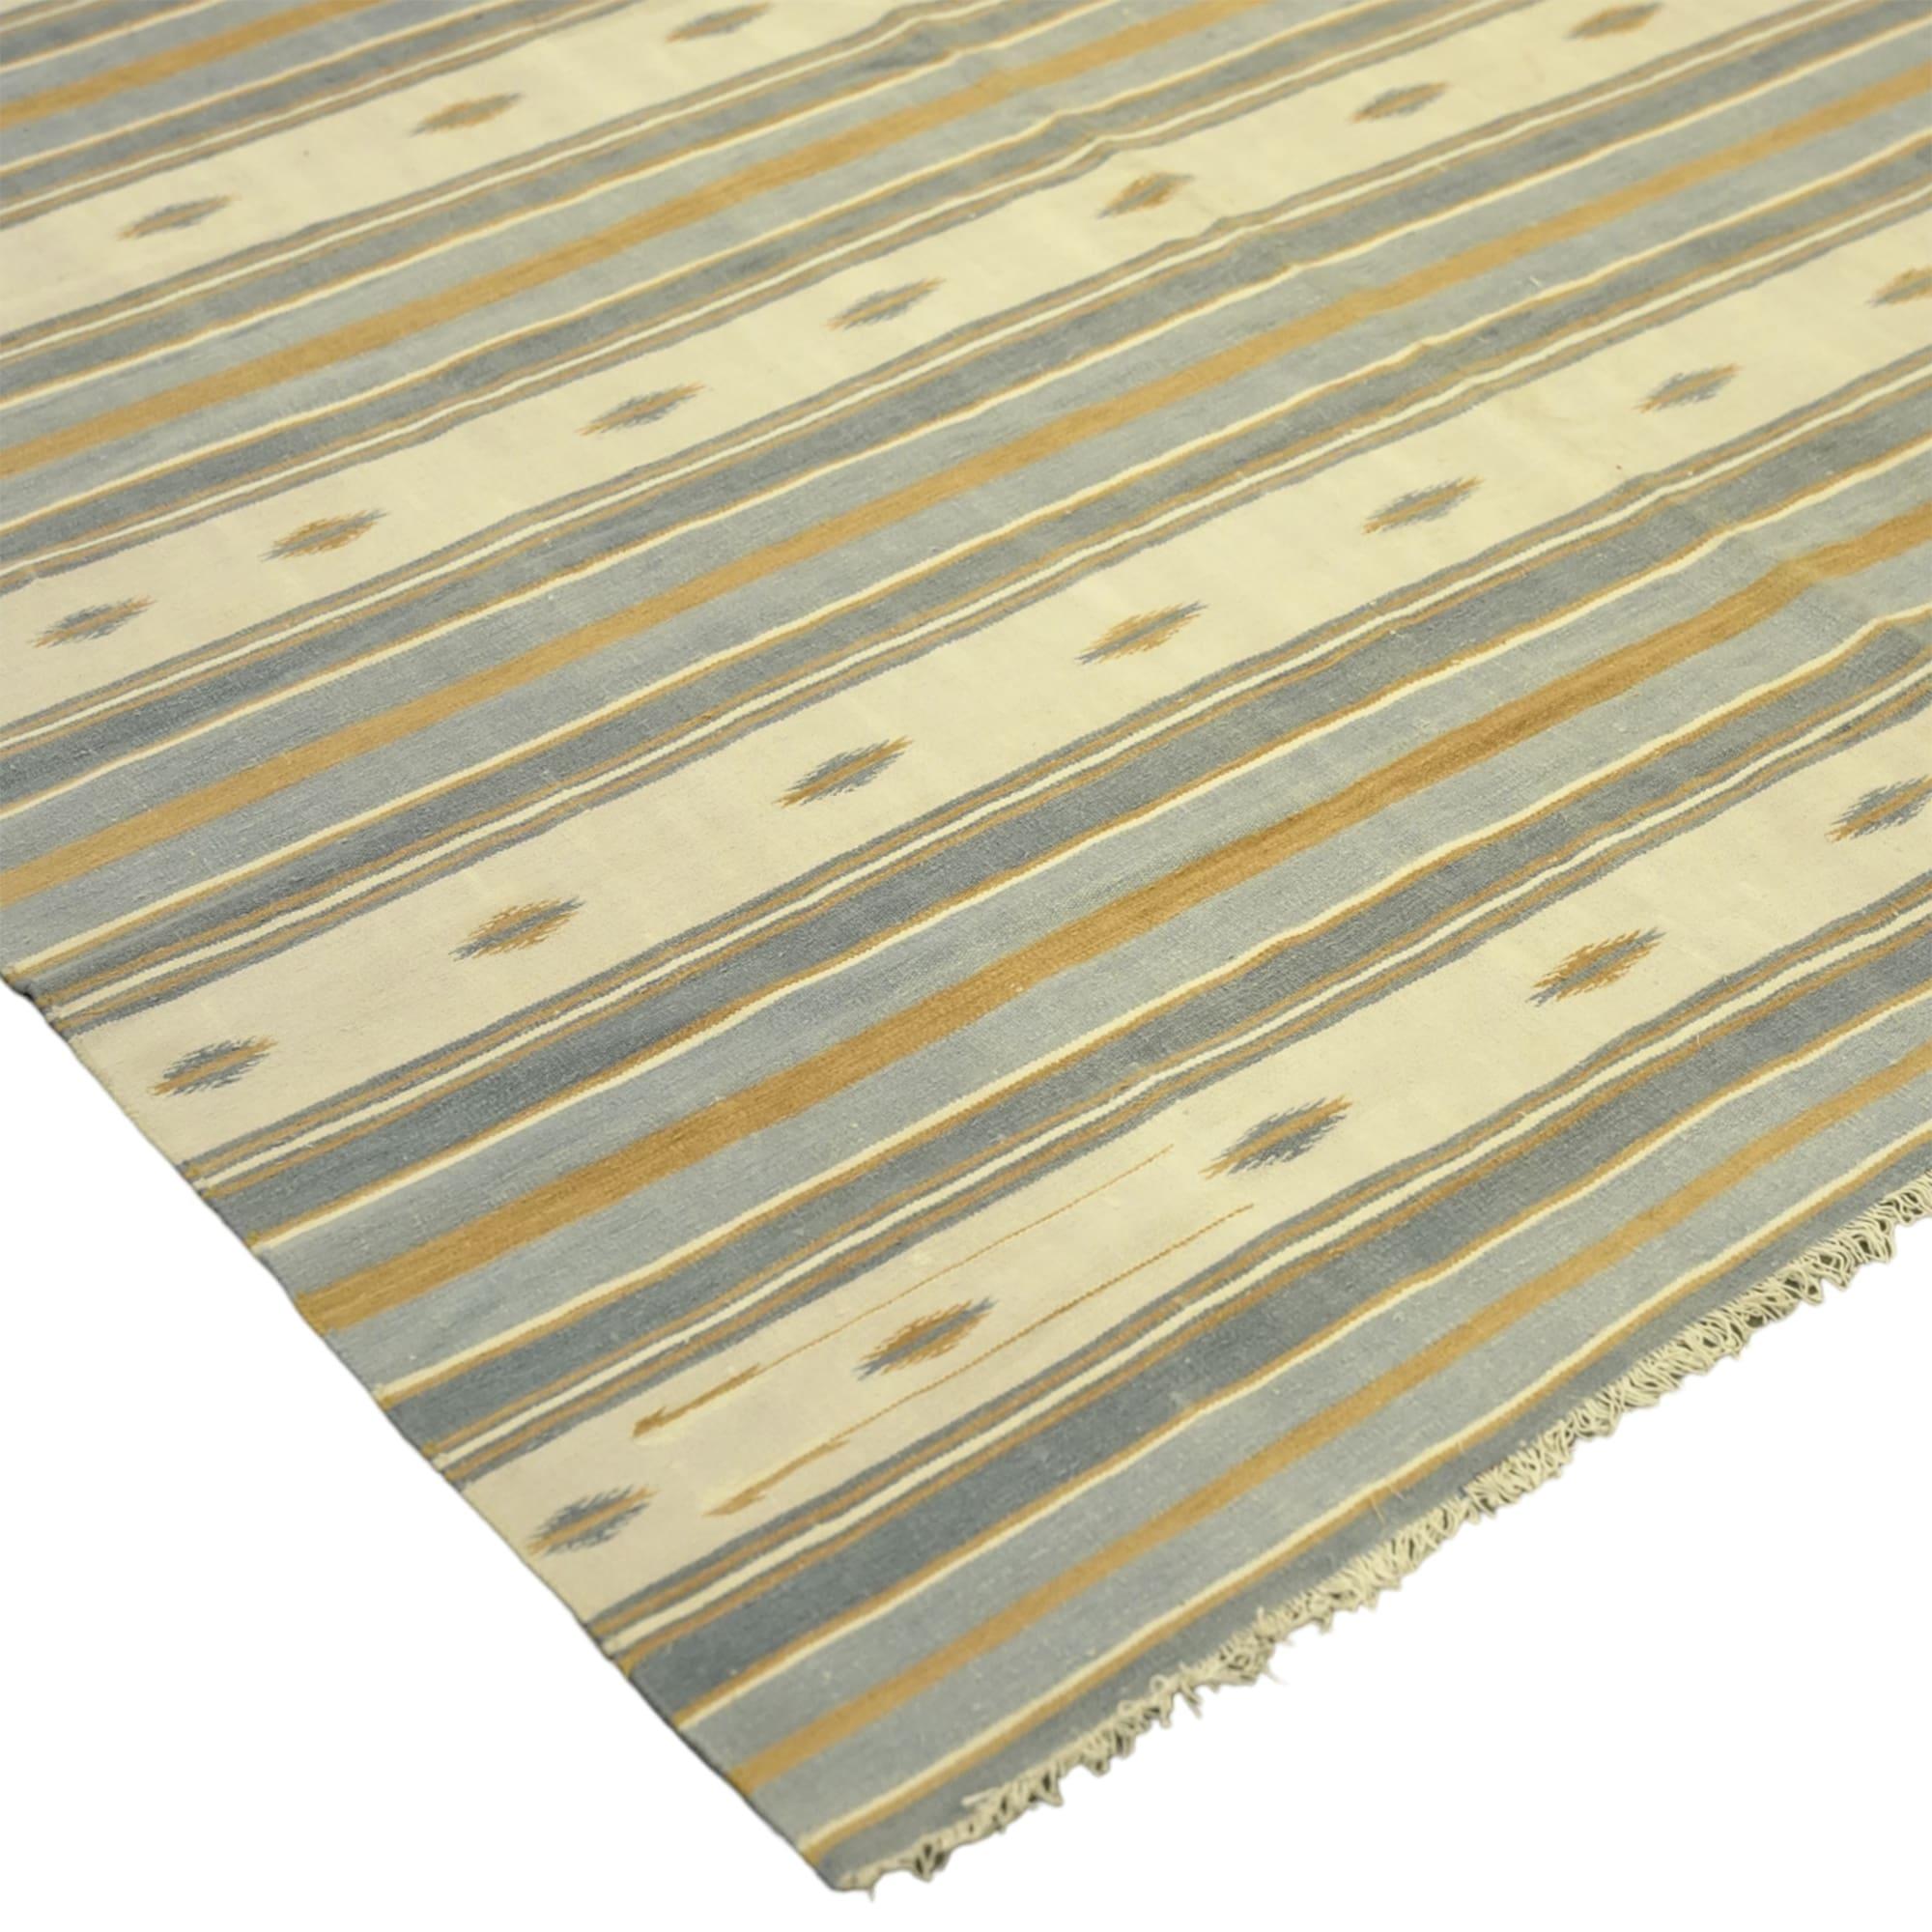 Hand-Woven Vintage Dhurrie Rug in Beige-Brownwith Stripes, from Rug & Kilim For Sale